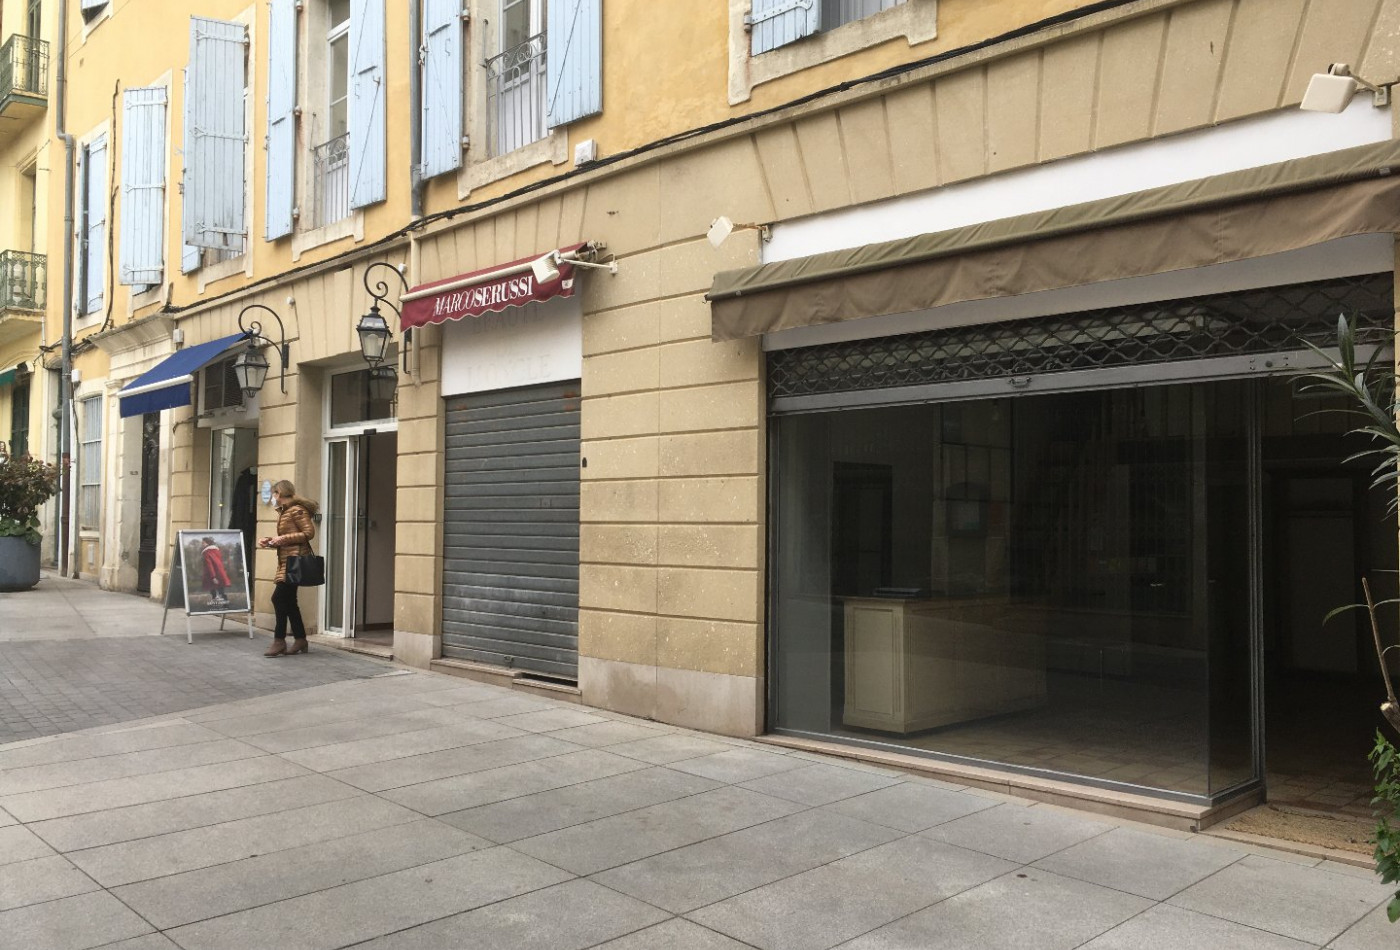 sale Local commercial Beziers